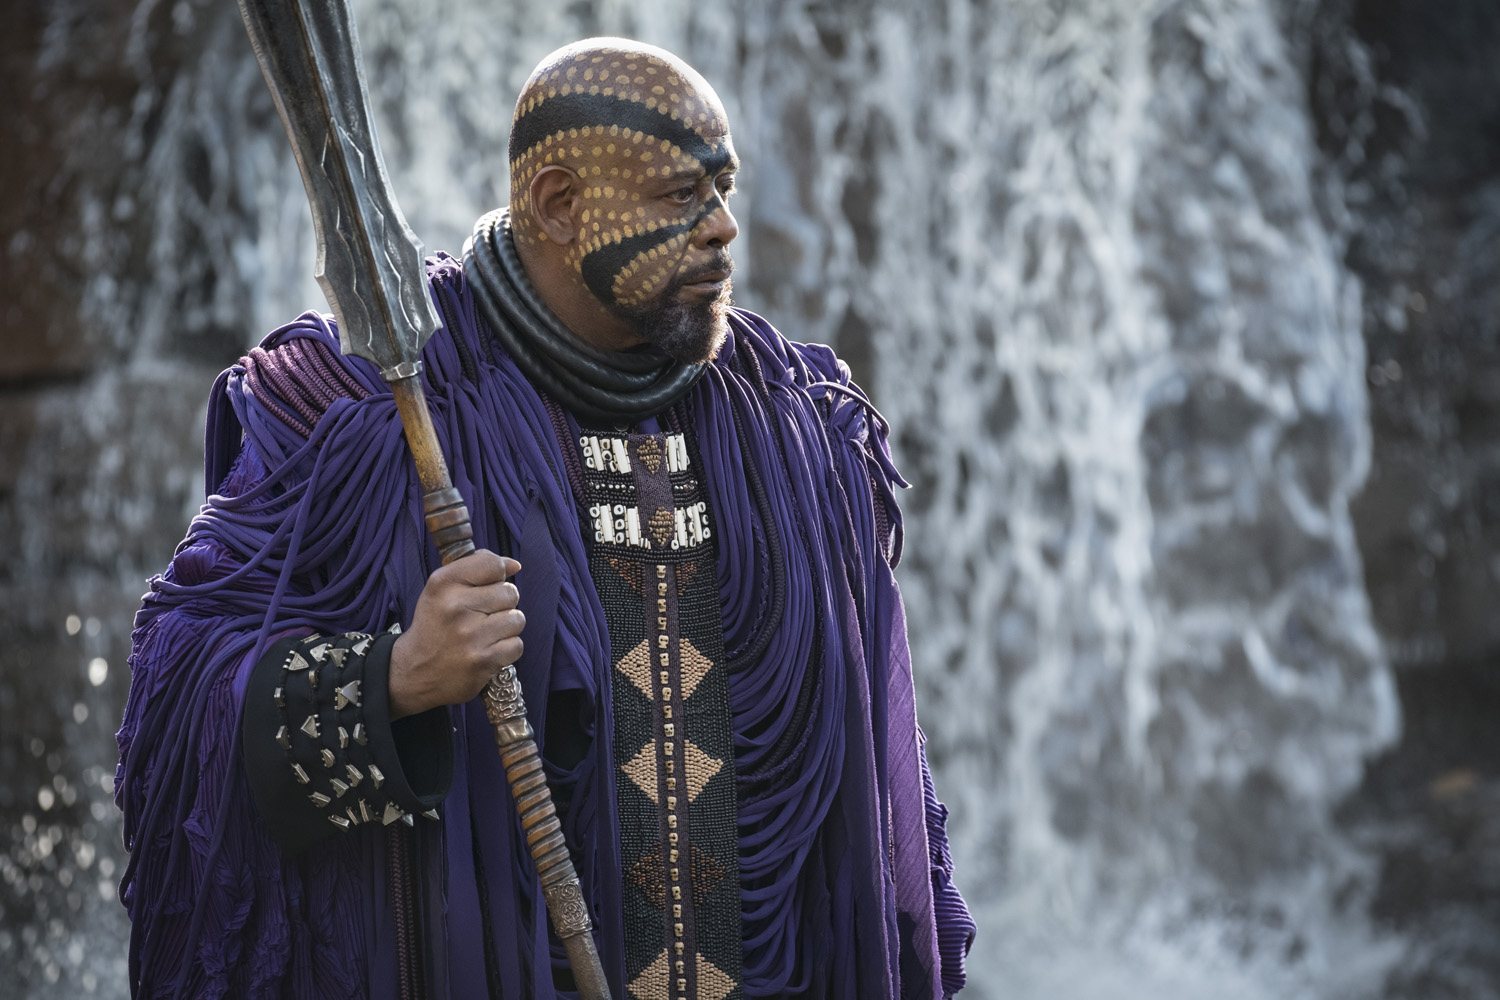 Forest Whitaker's Zuri wears purple garb and elaborate face paint while holding a giant scepter in Black Panther